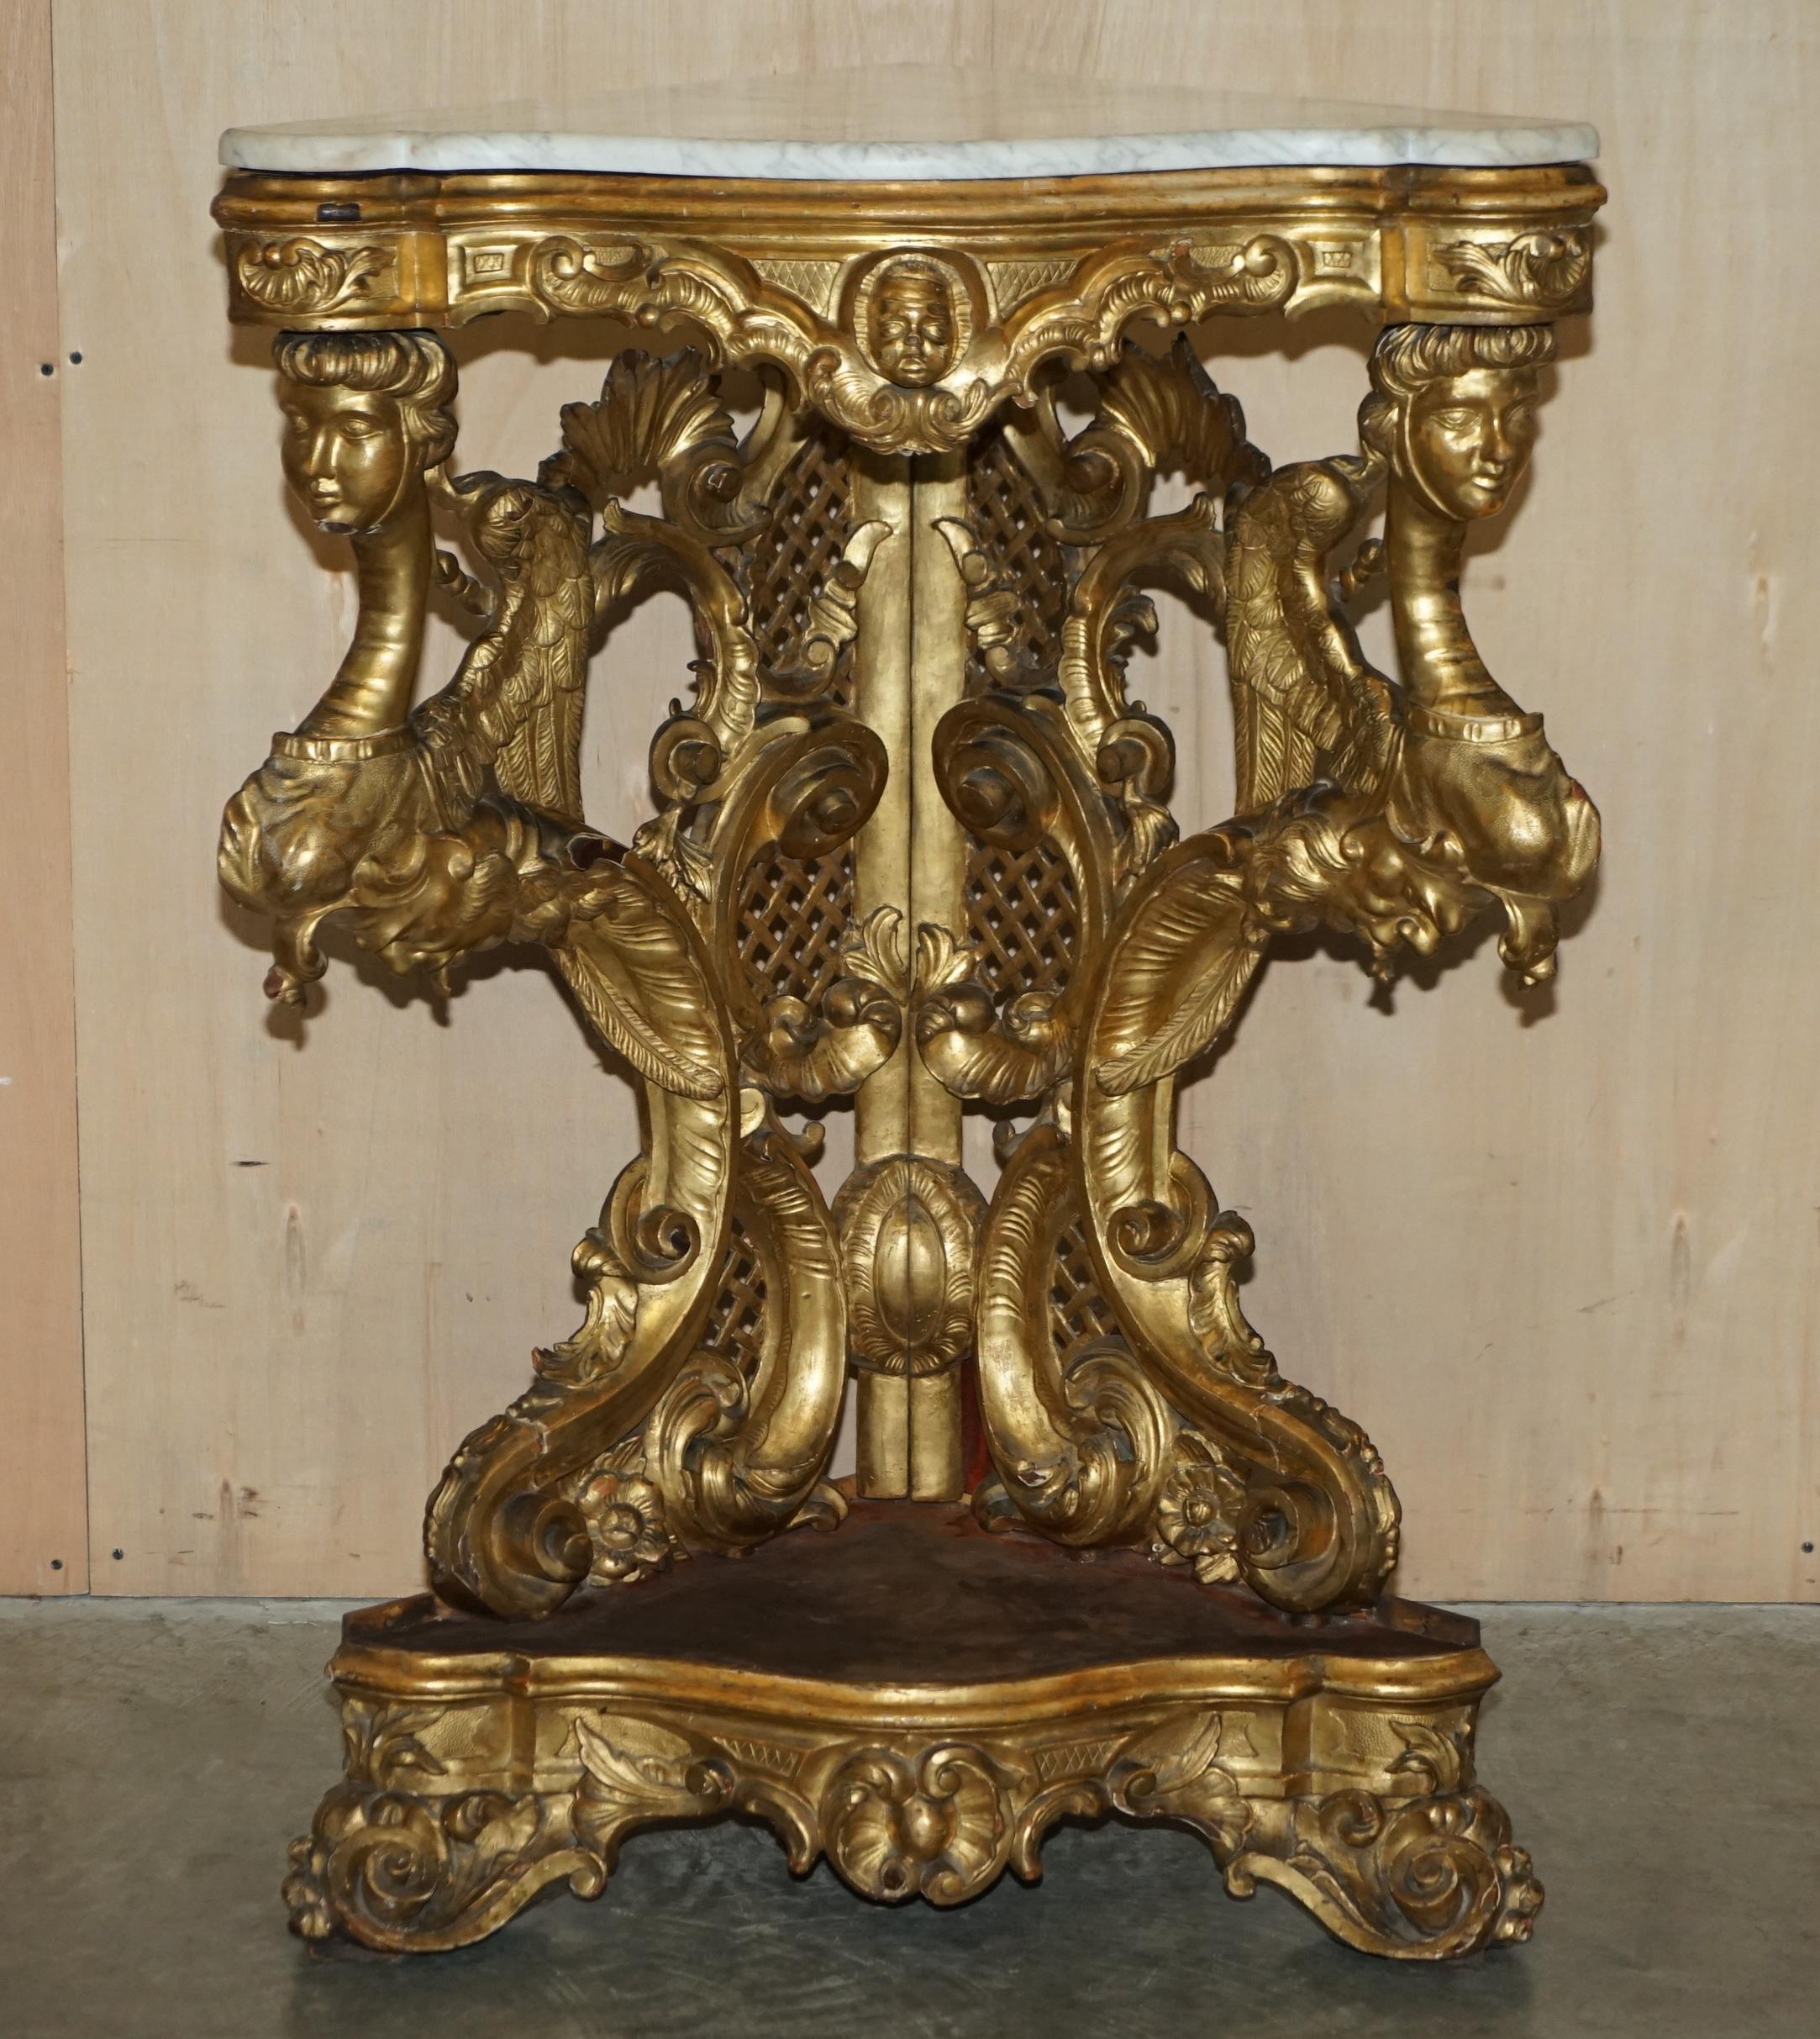 We are delighted to offer for sale this very fine and Important, Italian circa 1860 hand carved corner table with giltwood body and Italian Carrara marble top 

A very collectable and well made, decorative corner table, this is pure art furniture